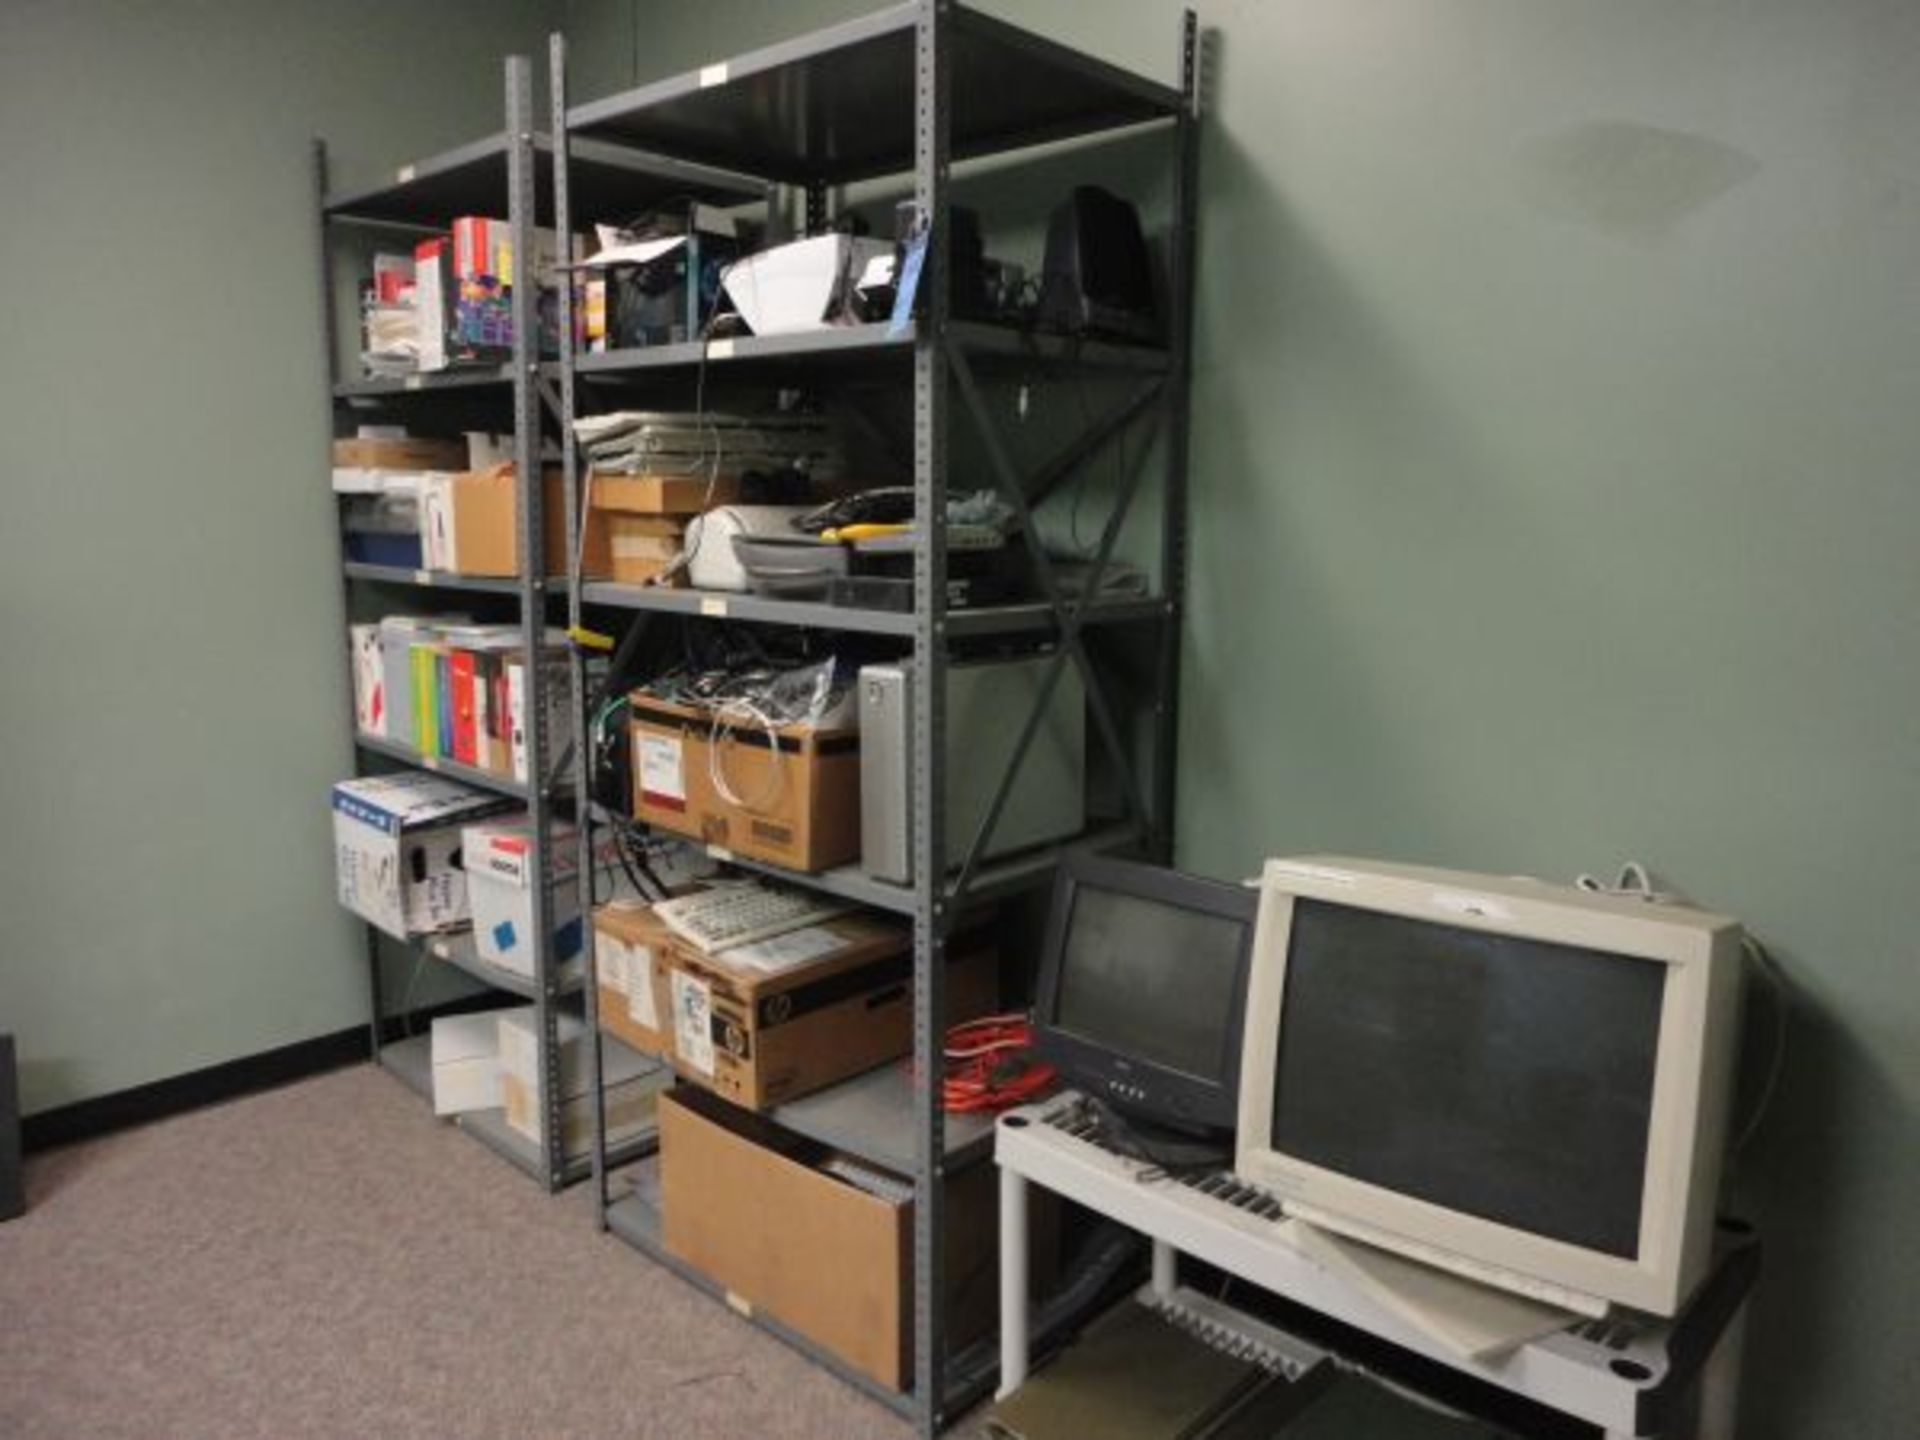 STEEL RACKS WITH CONTENTS INCLUDING COMPUTER PERIPHERALS, SOFTWARE AND WIRE